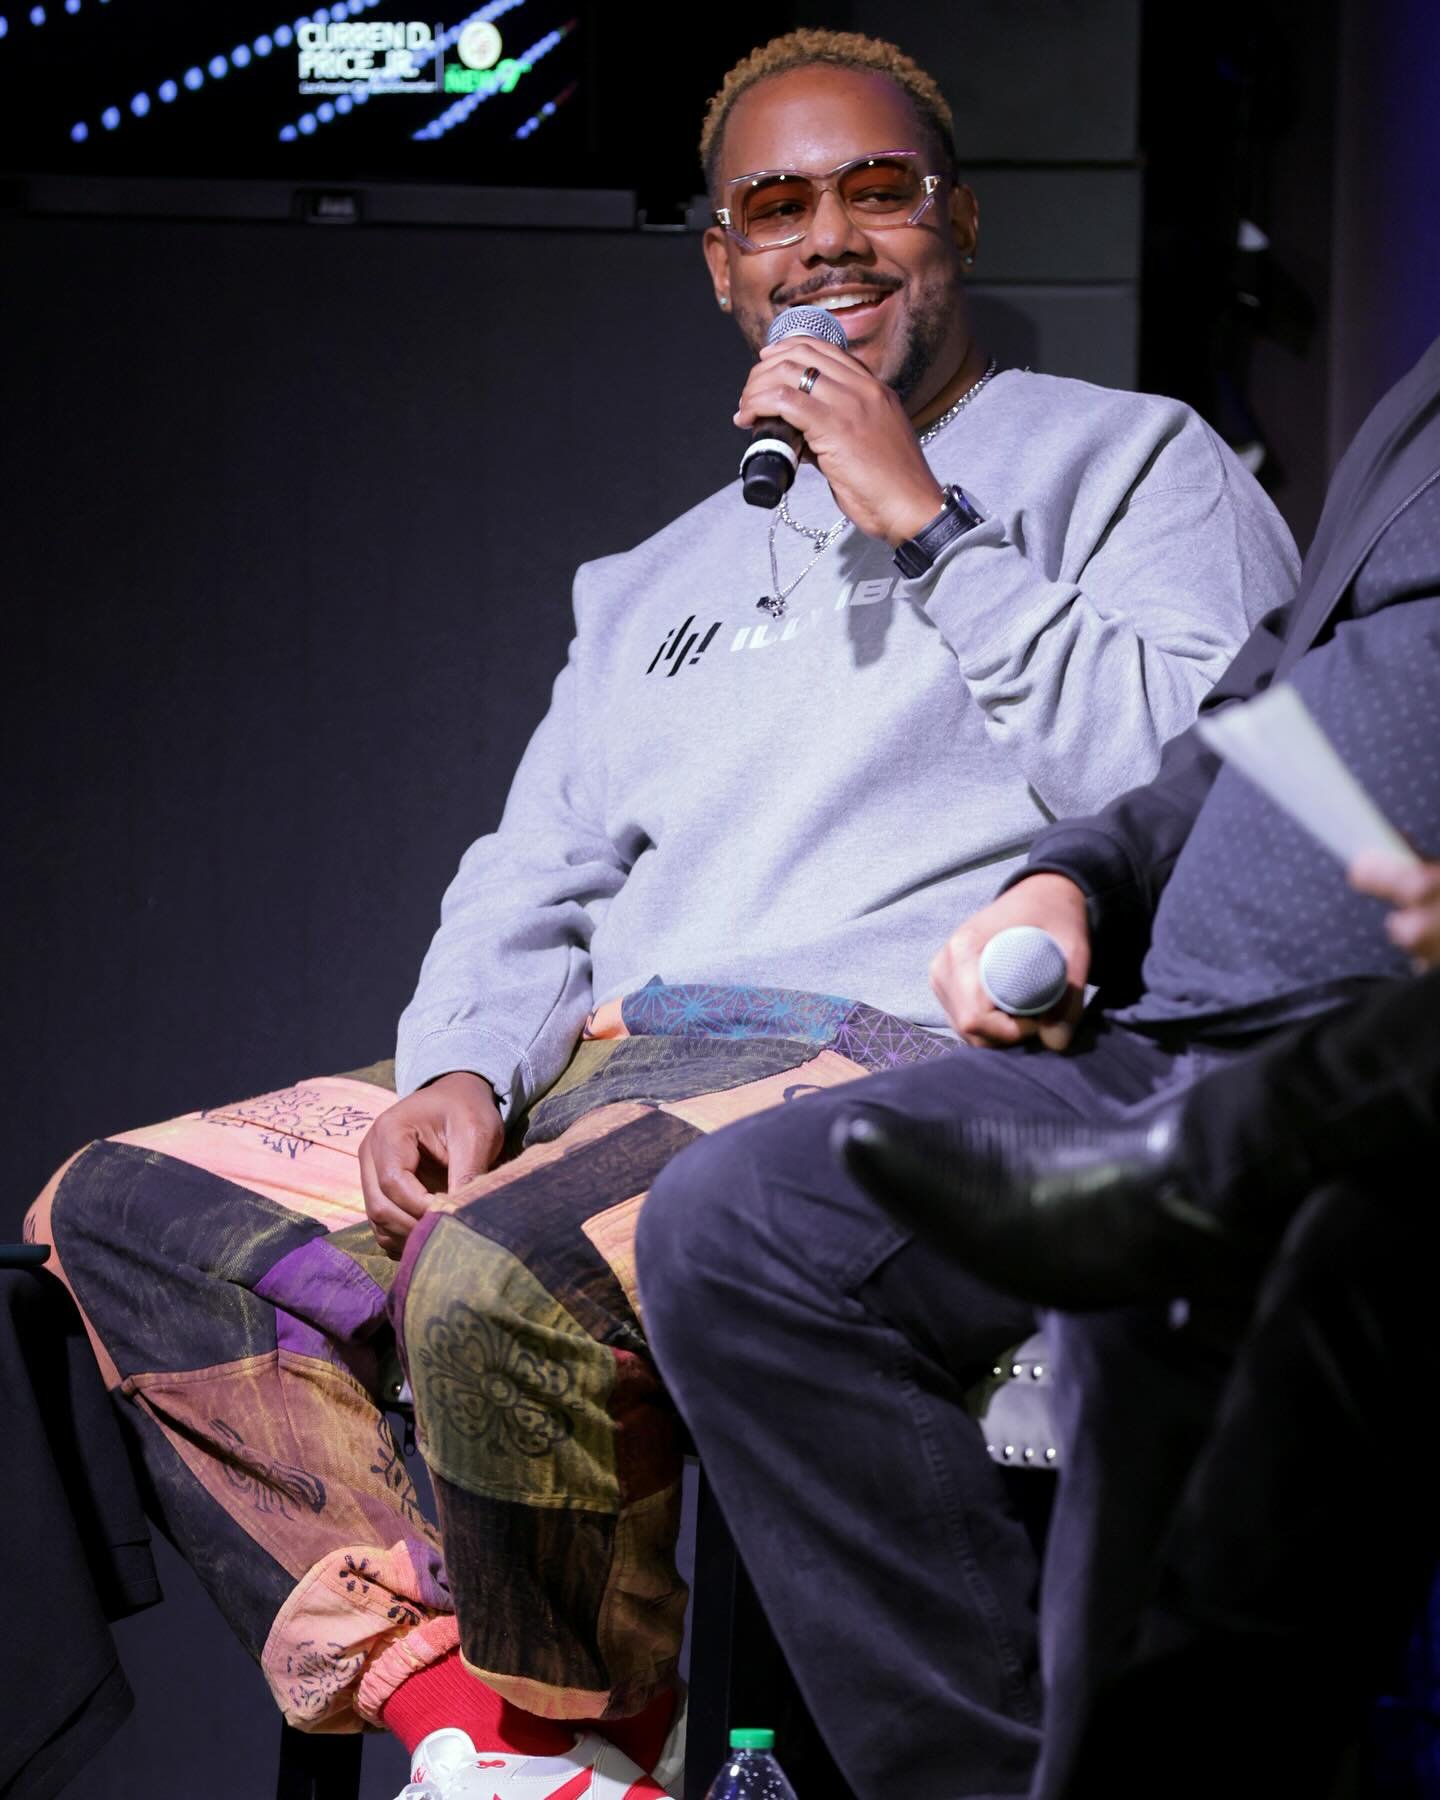 I&rsquo;m still buzzing from our discussion about the influence of DJing on hip hop and the art of sampling using @seratoproduction at the @grammymuseum this past weekend. Big up to @schyleroneal for a pristine discussion, to @djkhalil for being an a